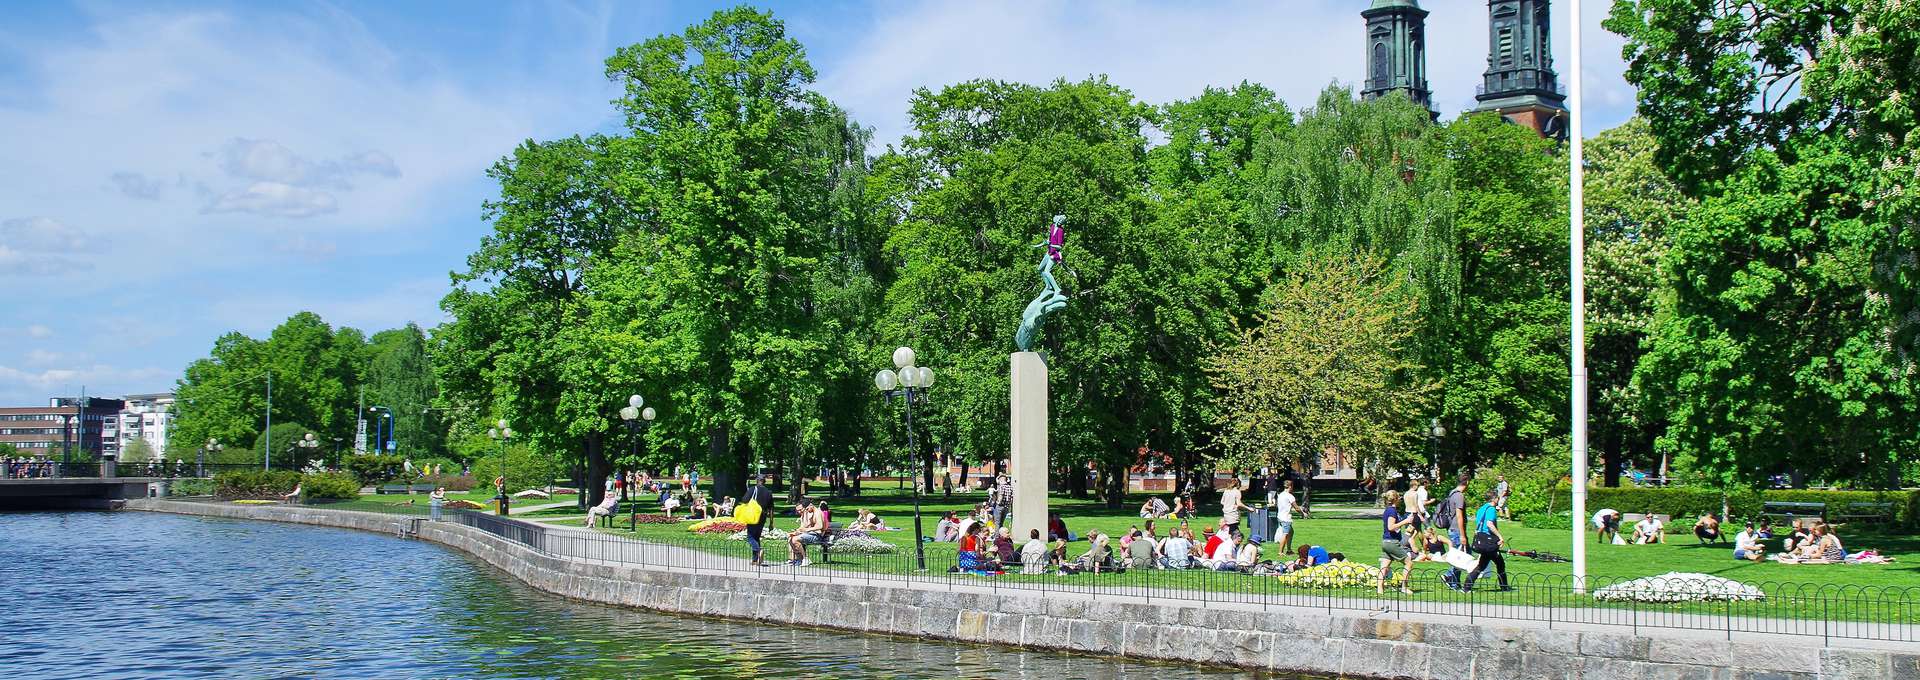 Eskilstuna city park during the summer. People sitting on the grass in a green park.